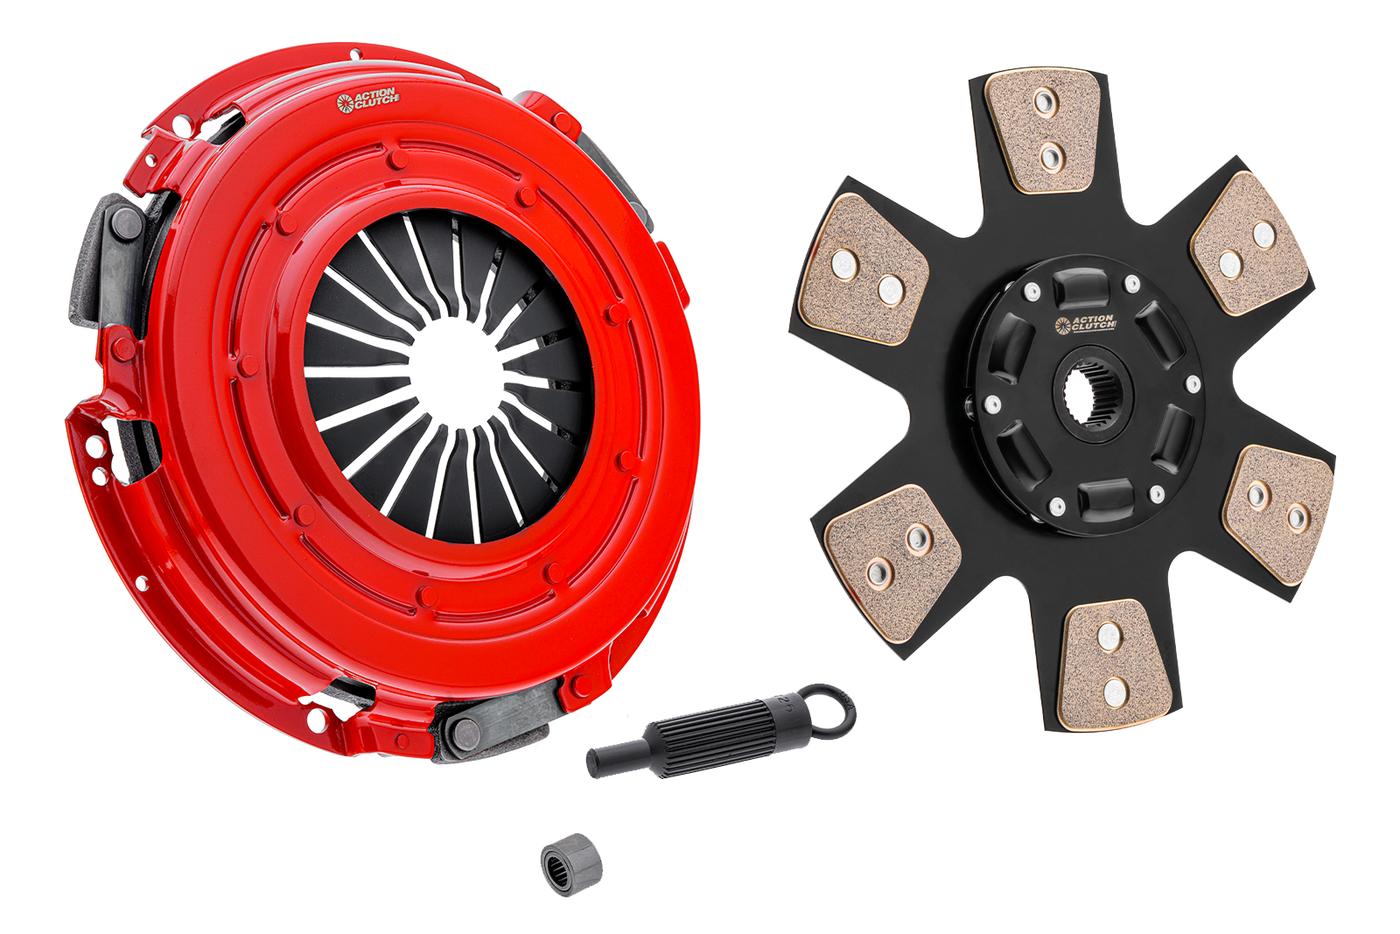 Stage 5 Clutch Kit (2MS) for Pontiac GTO 2005-2006 6.0L (LS2) Without Slave and Release Bearing